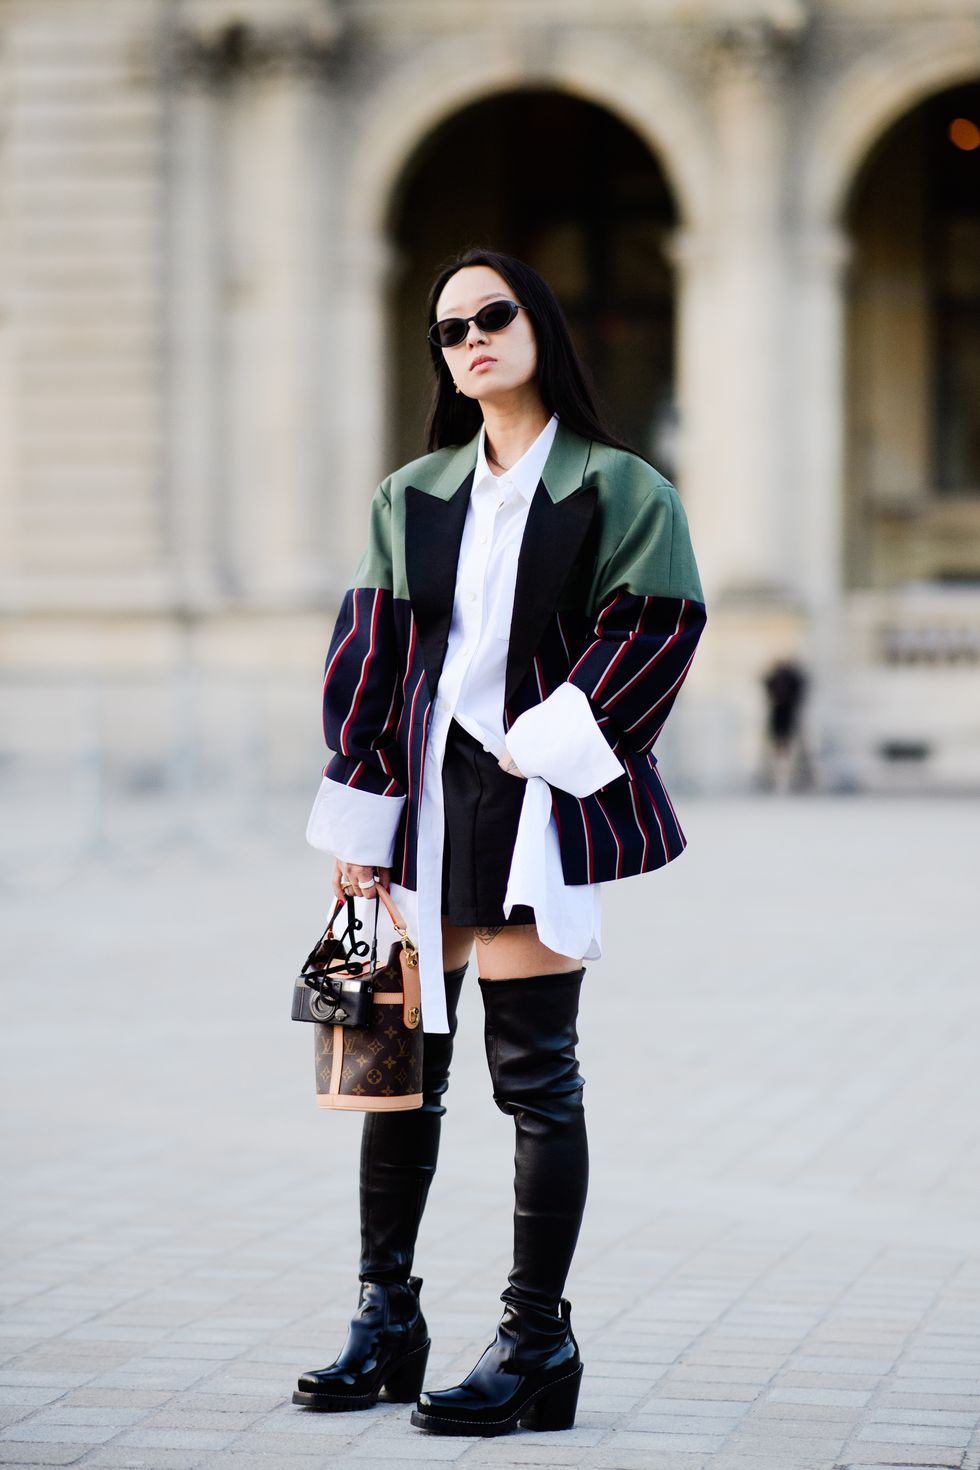 PFW: Street Style 2018 Part 2 - Come into Blossom